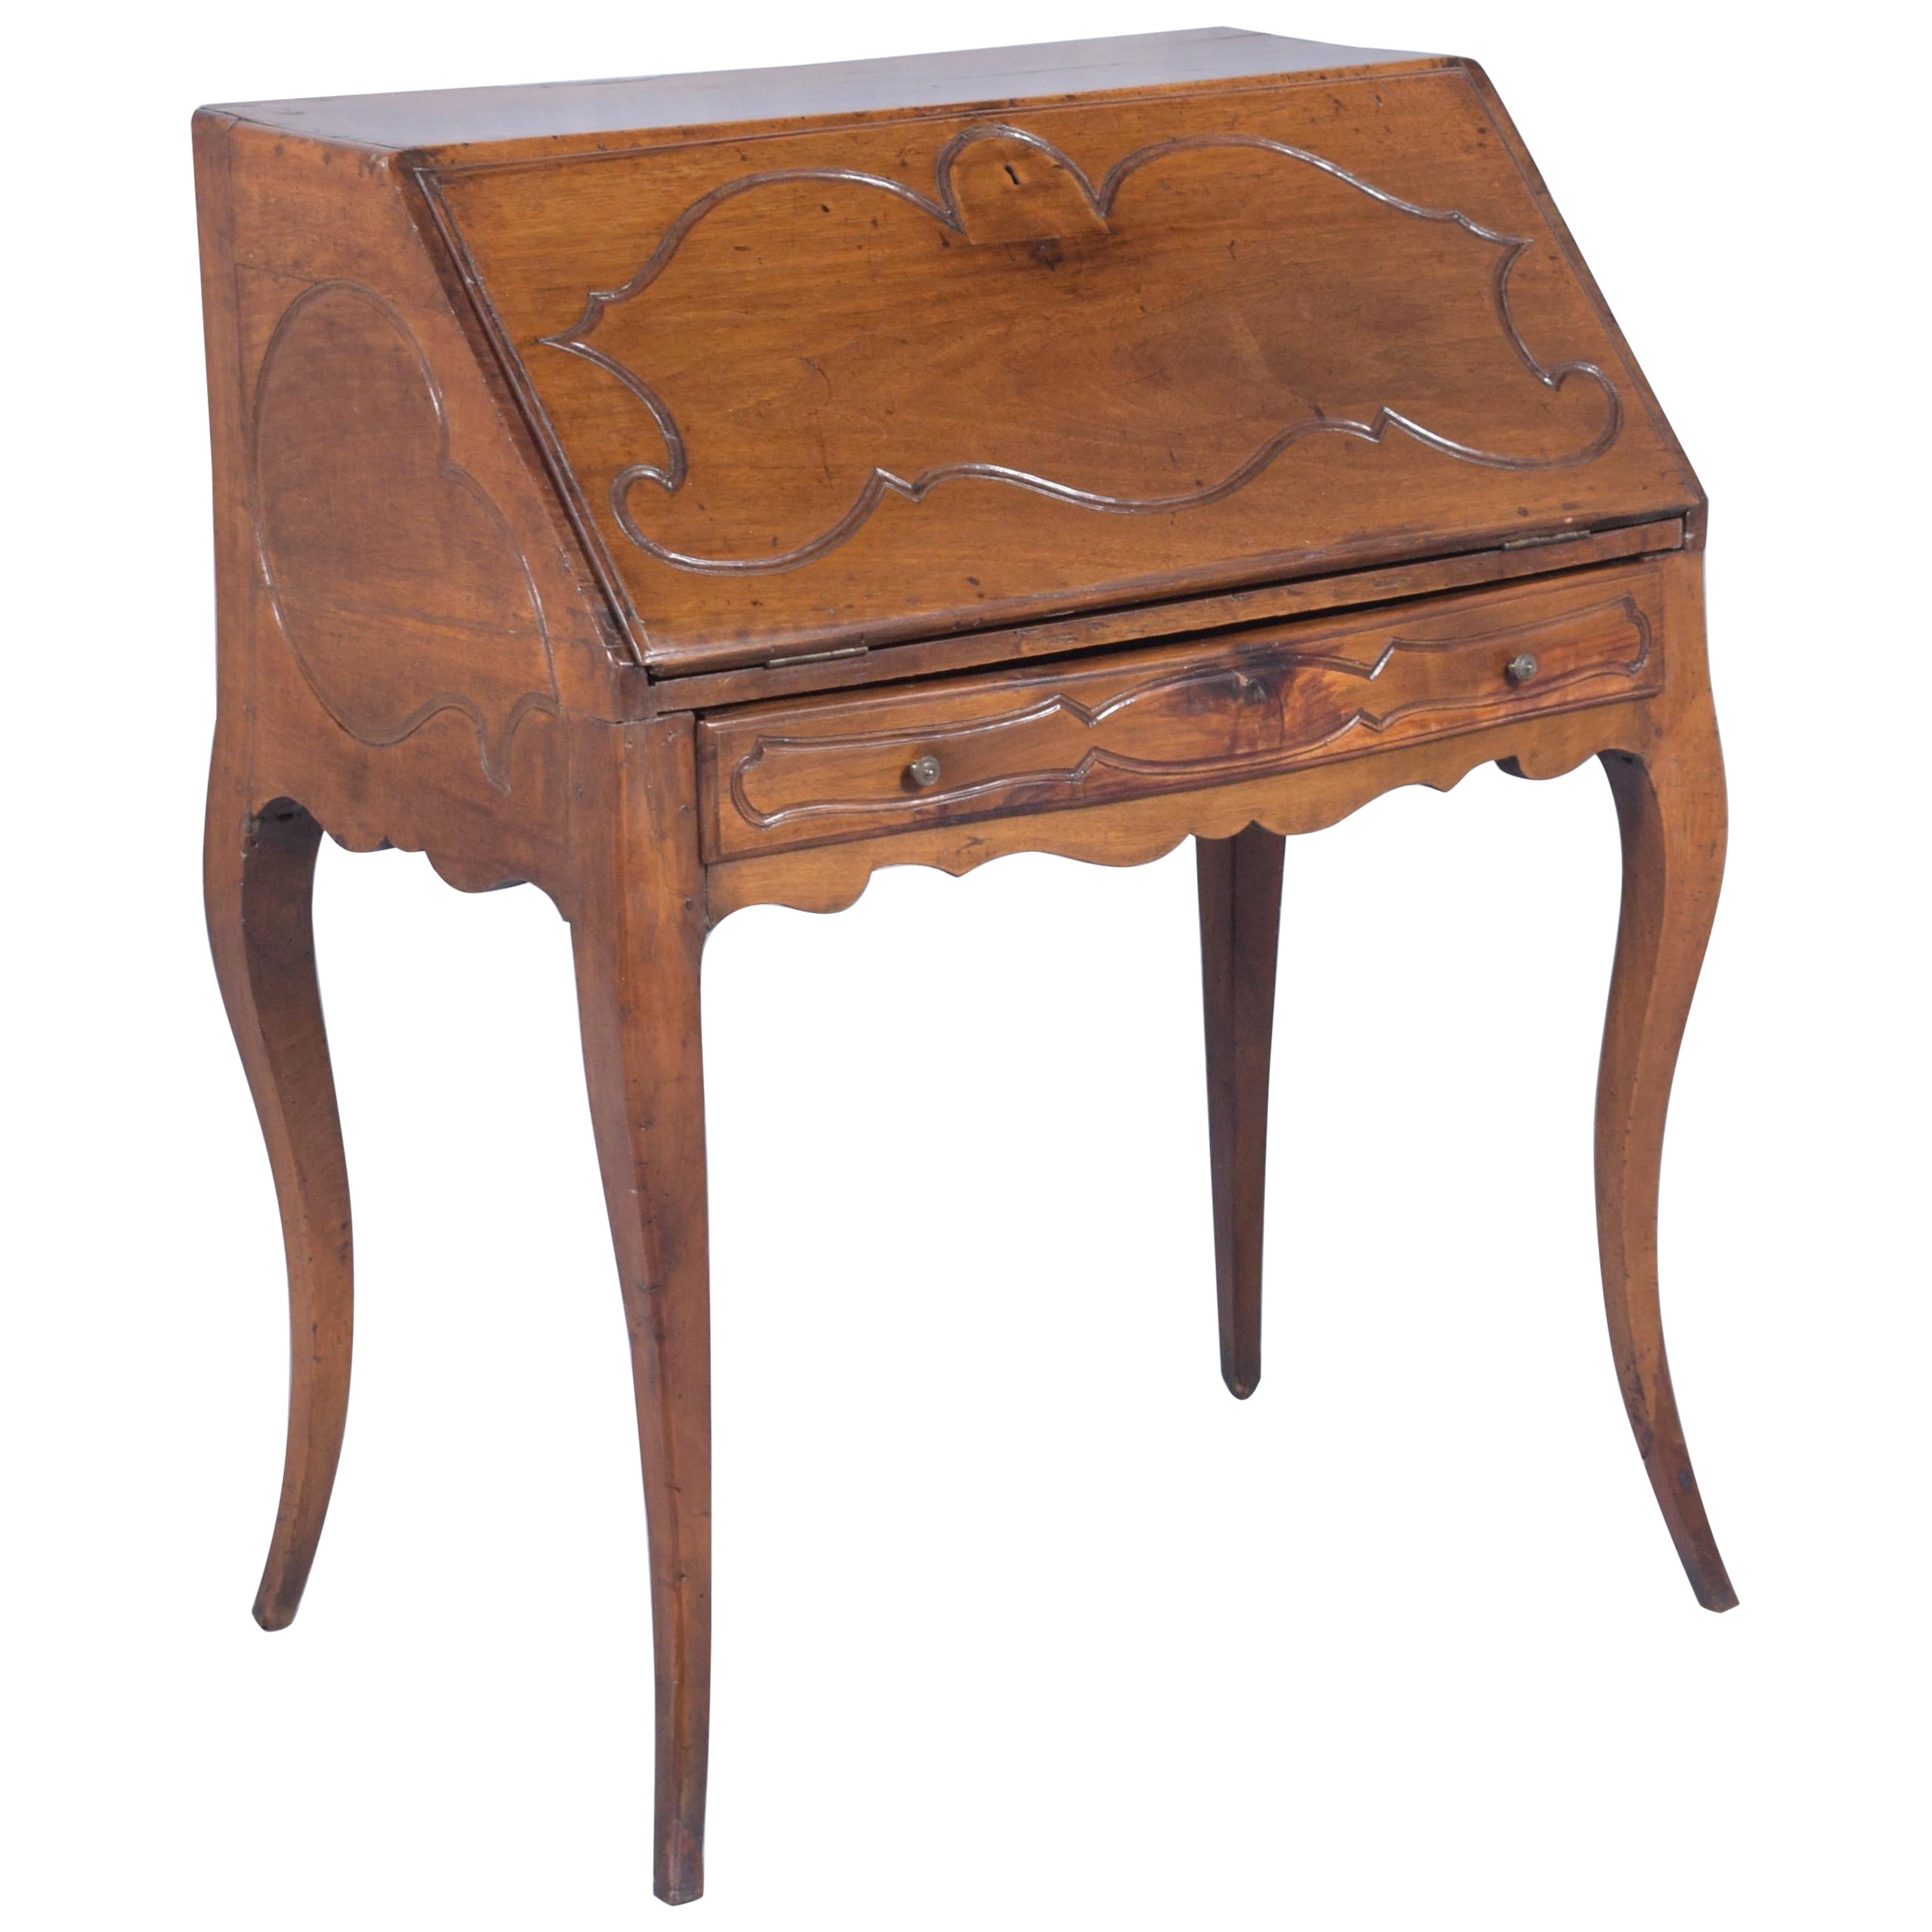 Restored Late 18th-Century French Antique Secrétaire with Intricate Carvings